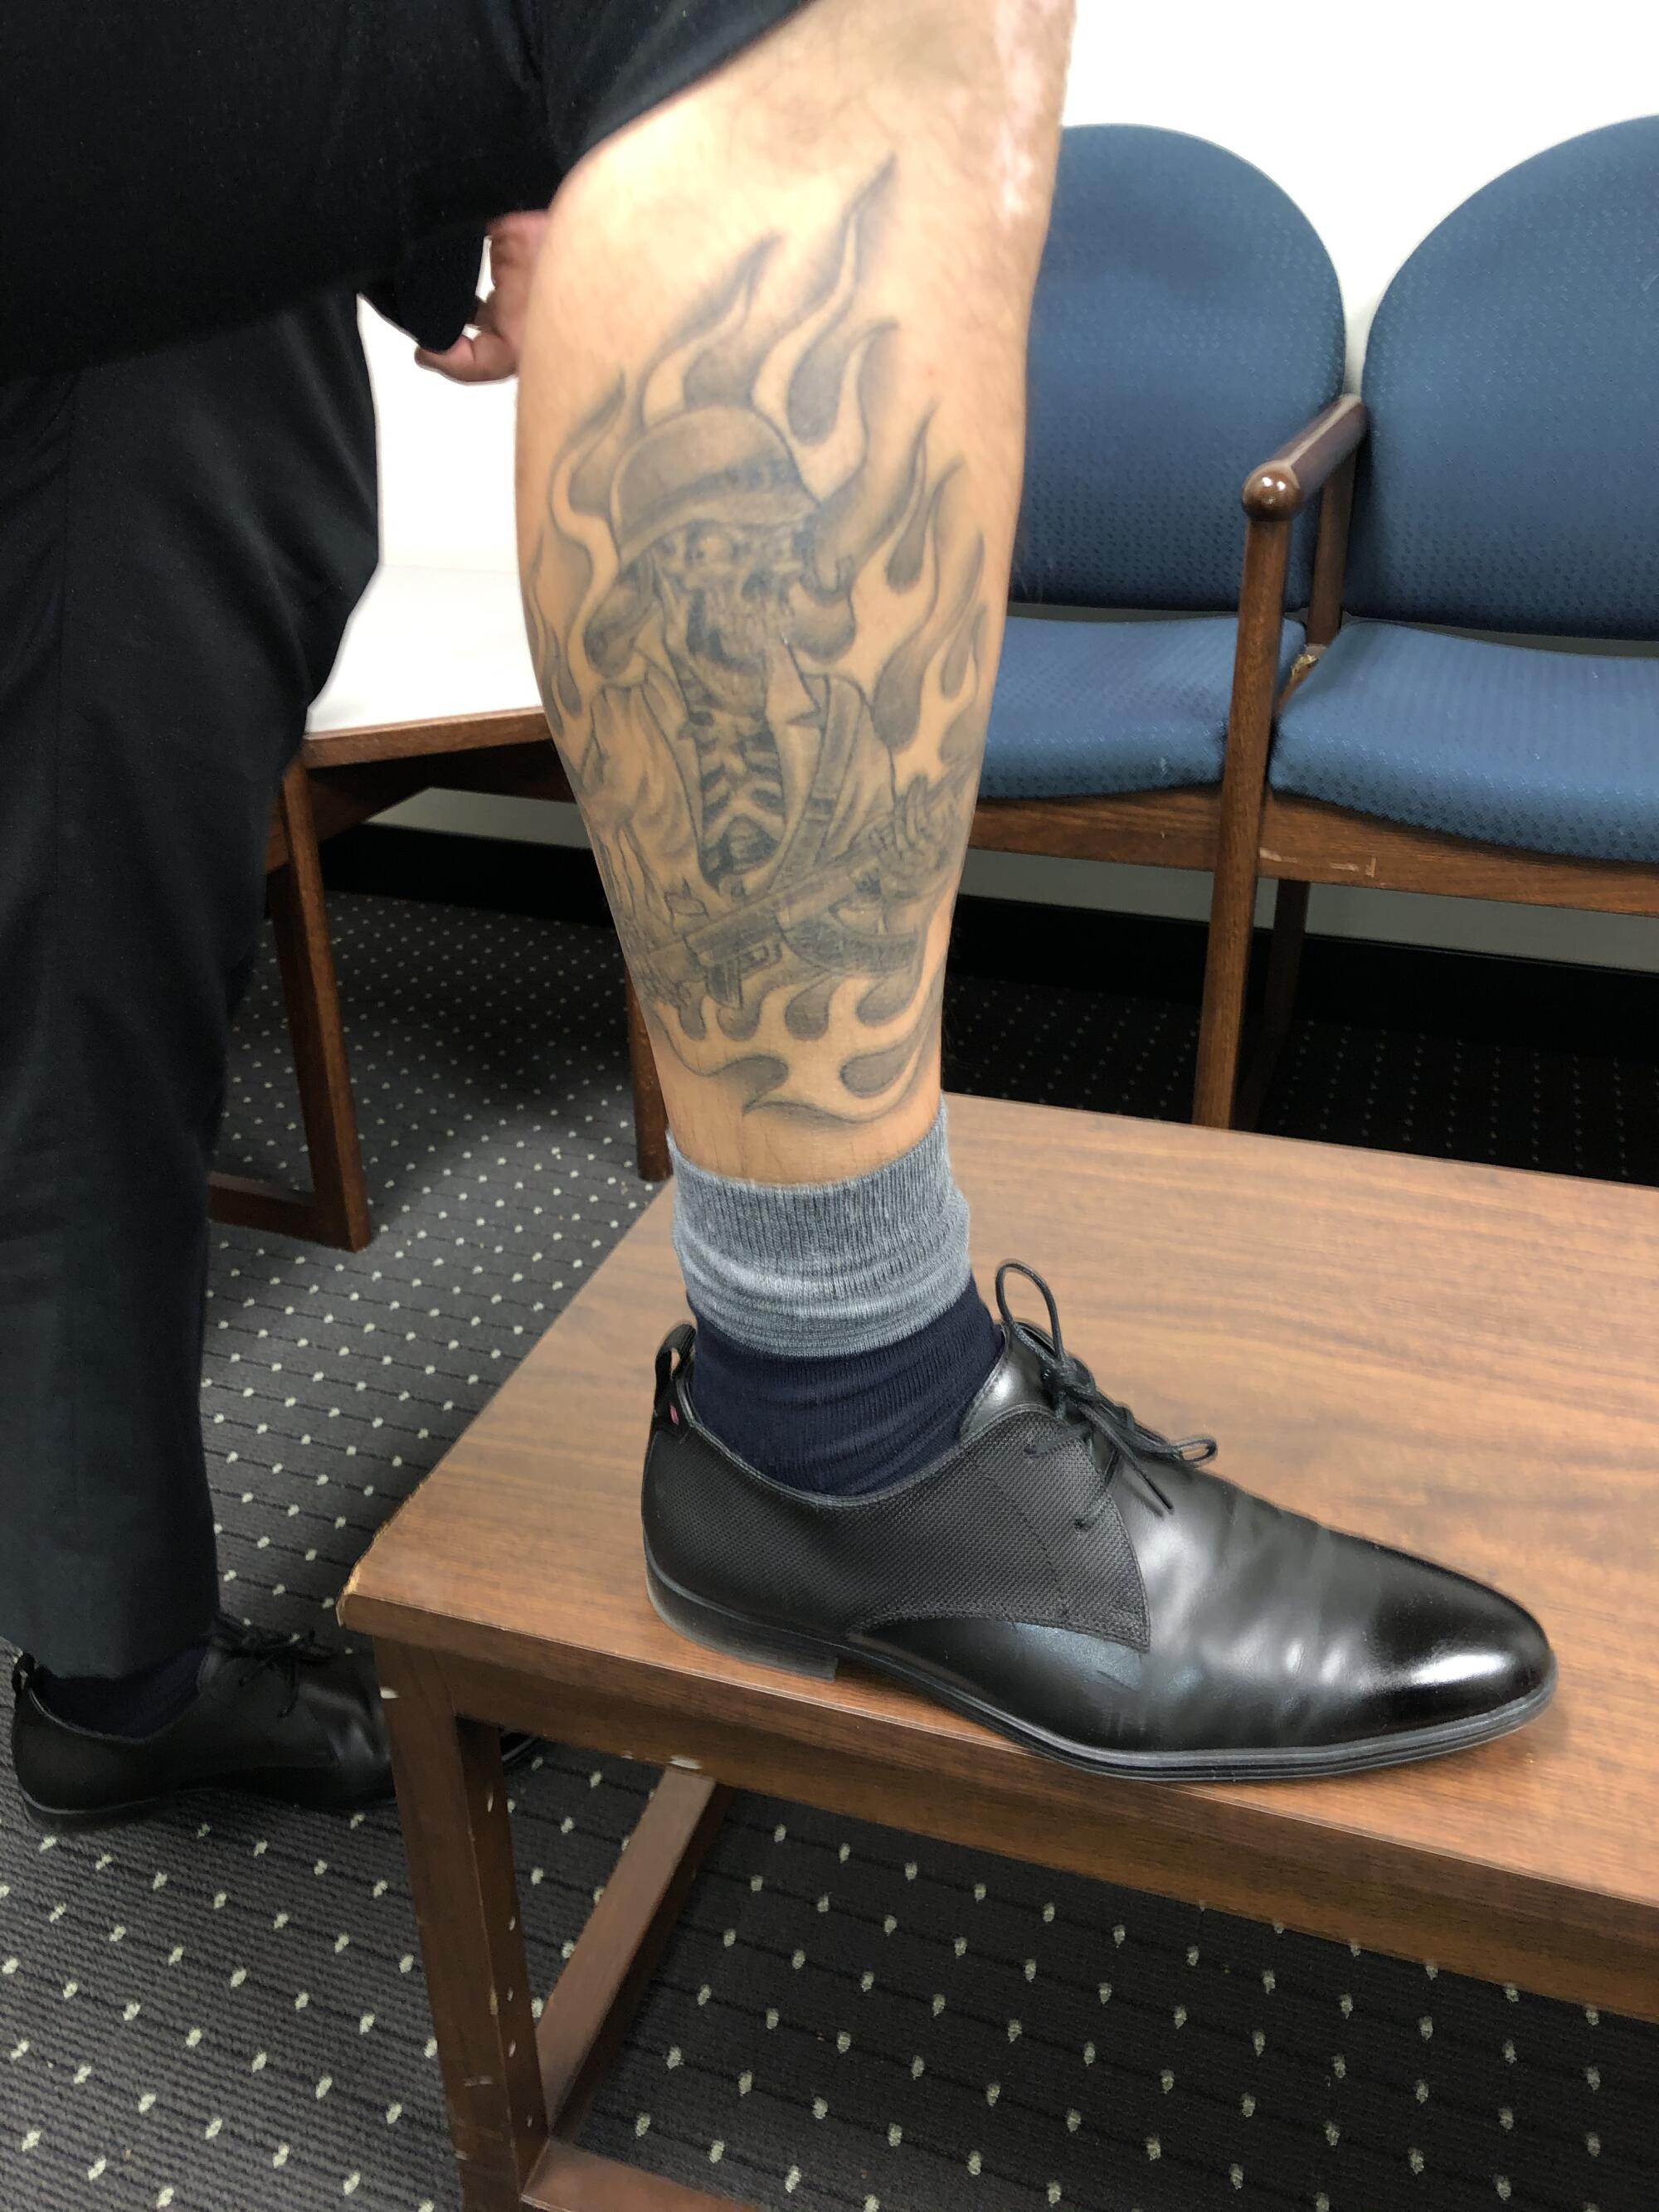 A tattoo of a skull with a rifle and a military-style helmet surrounded by flames on the right leg of a sheriff’s deputy